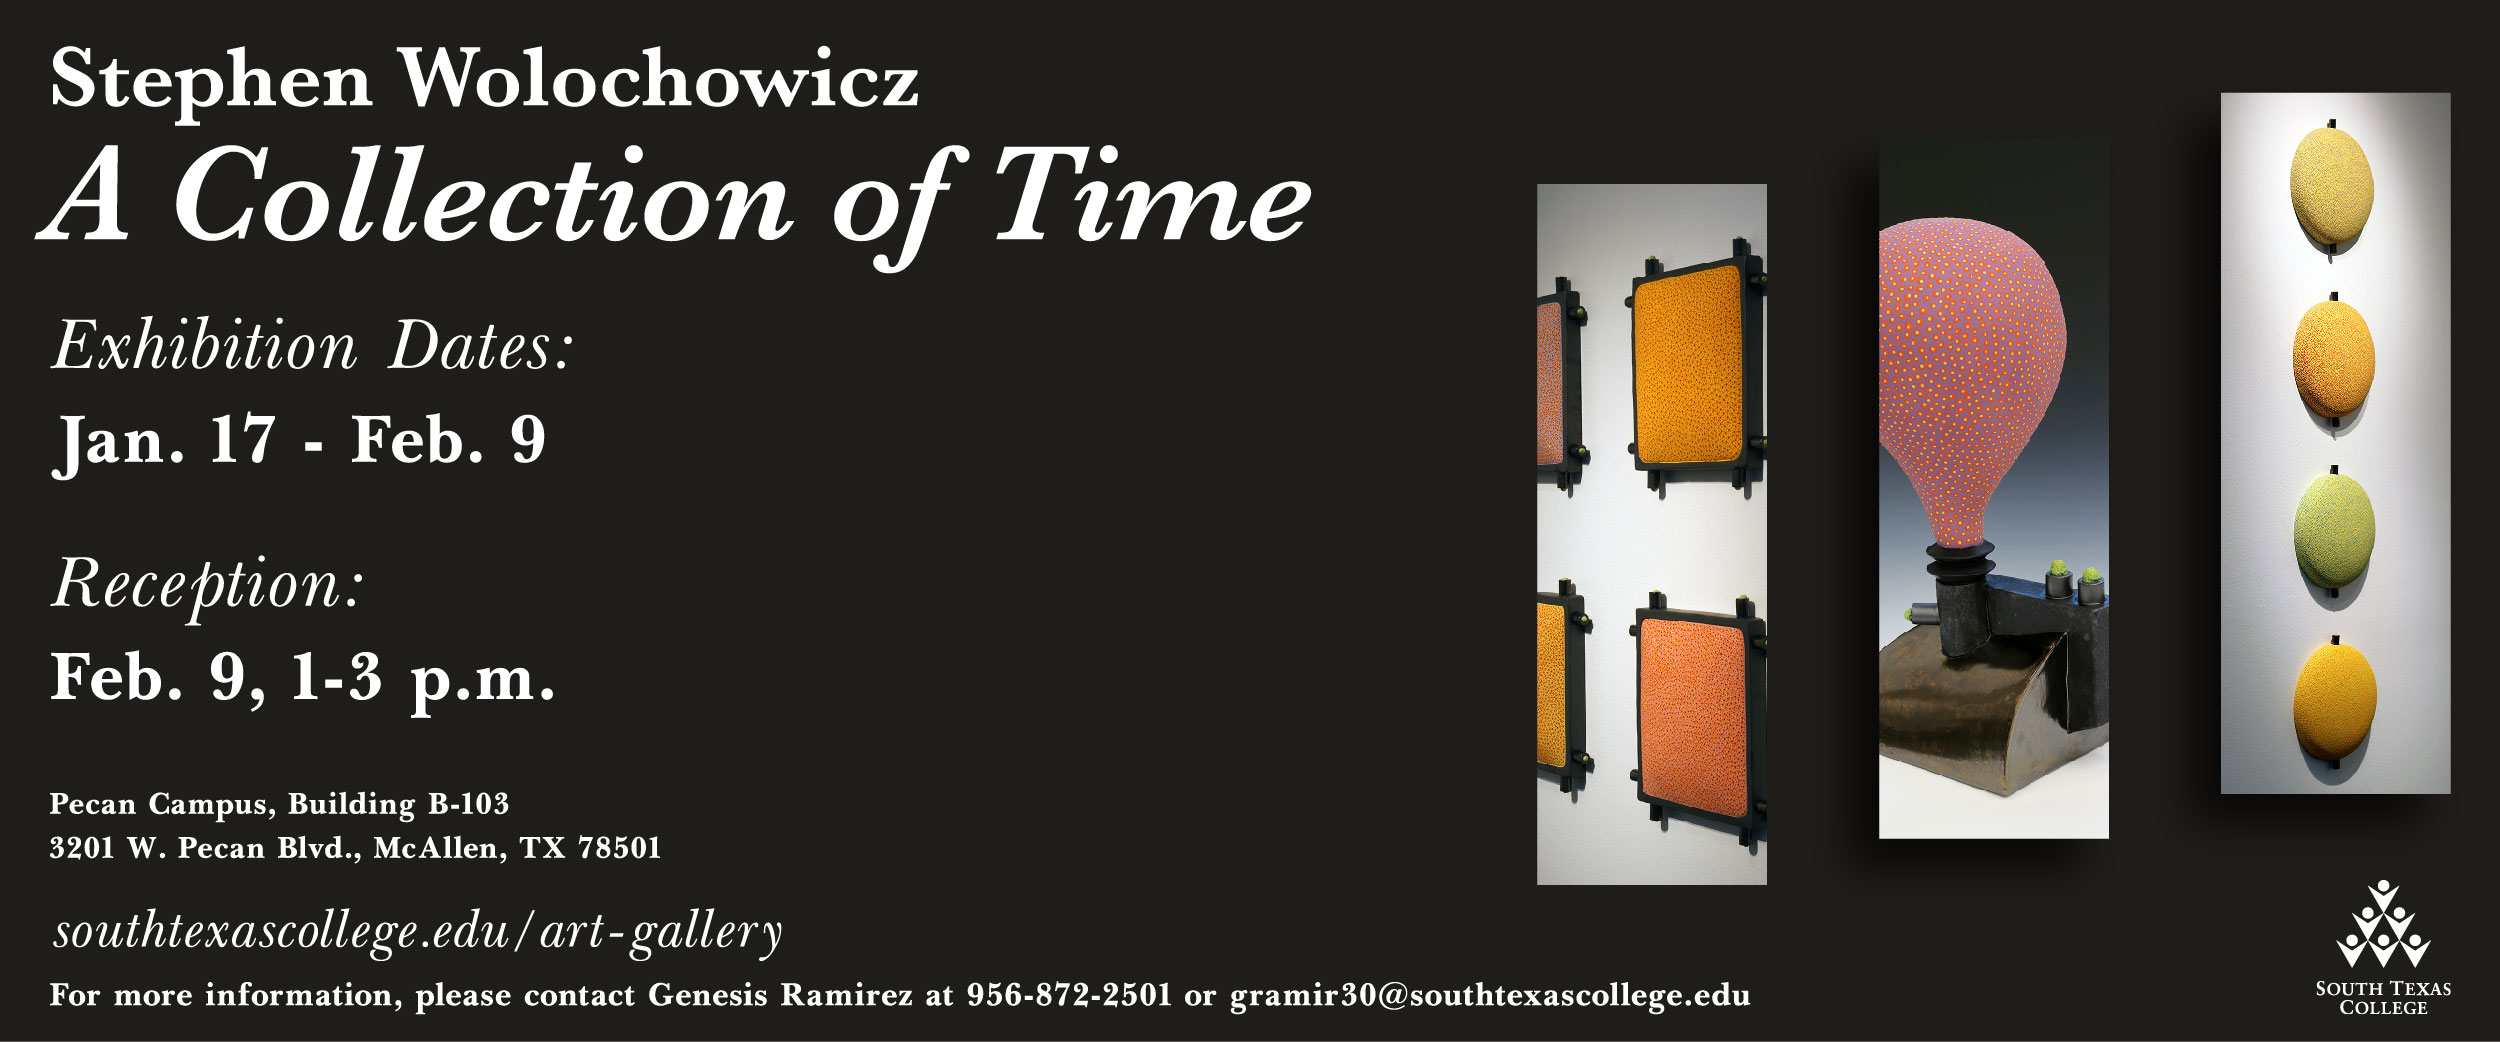 Stephen Wolochowicz: A Collection of Time